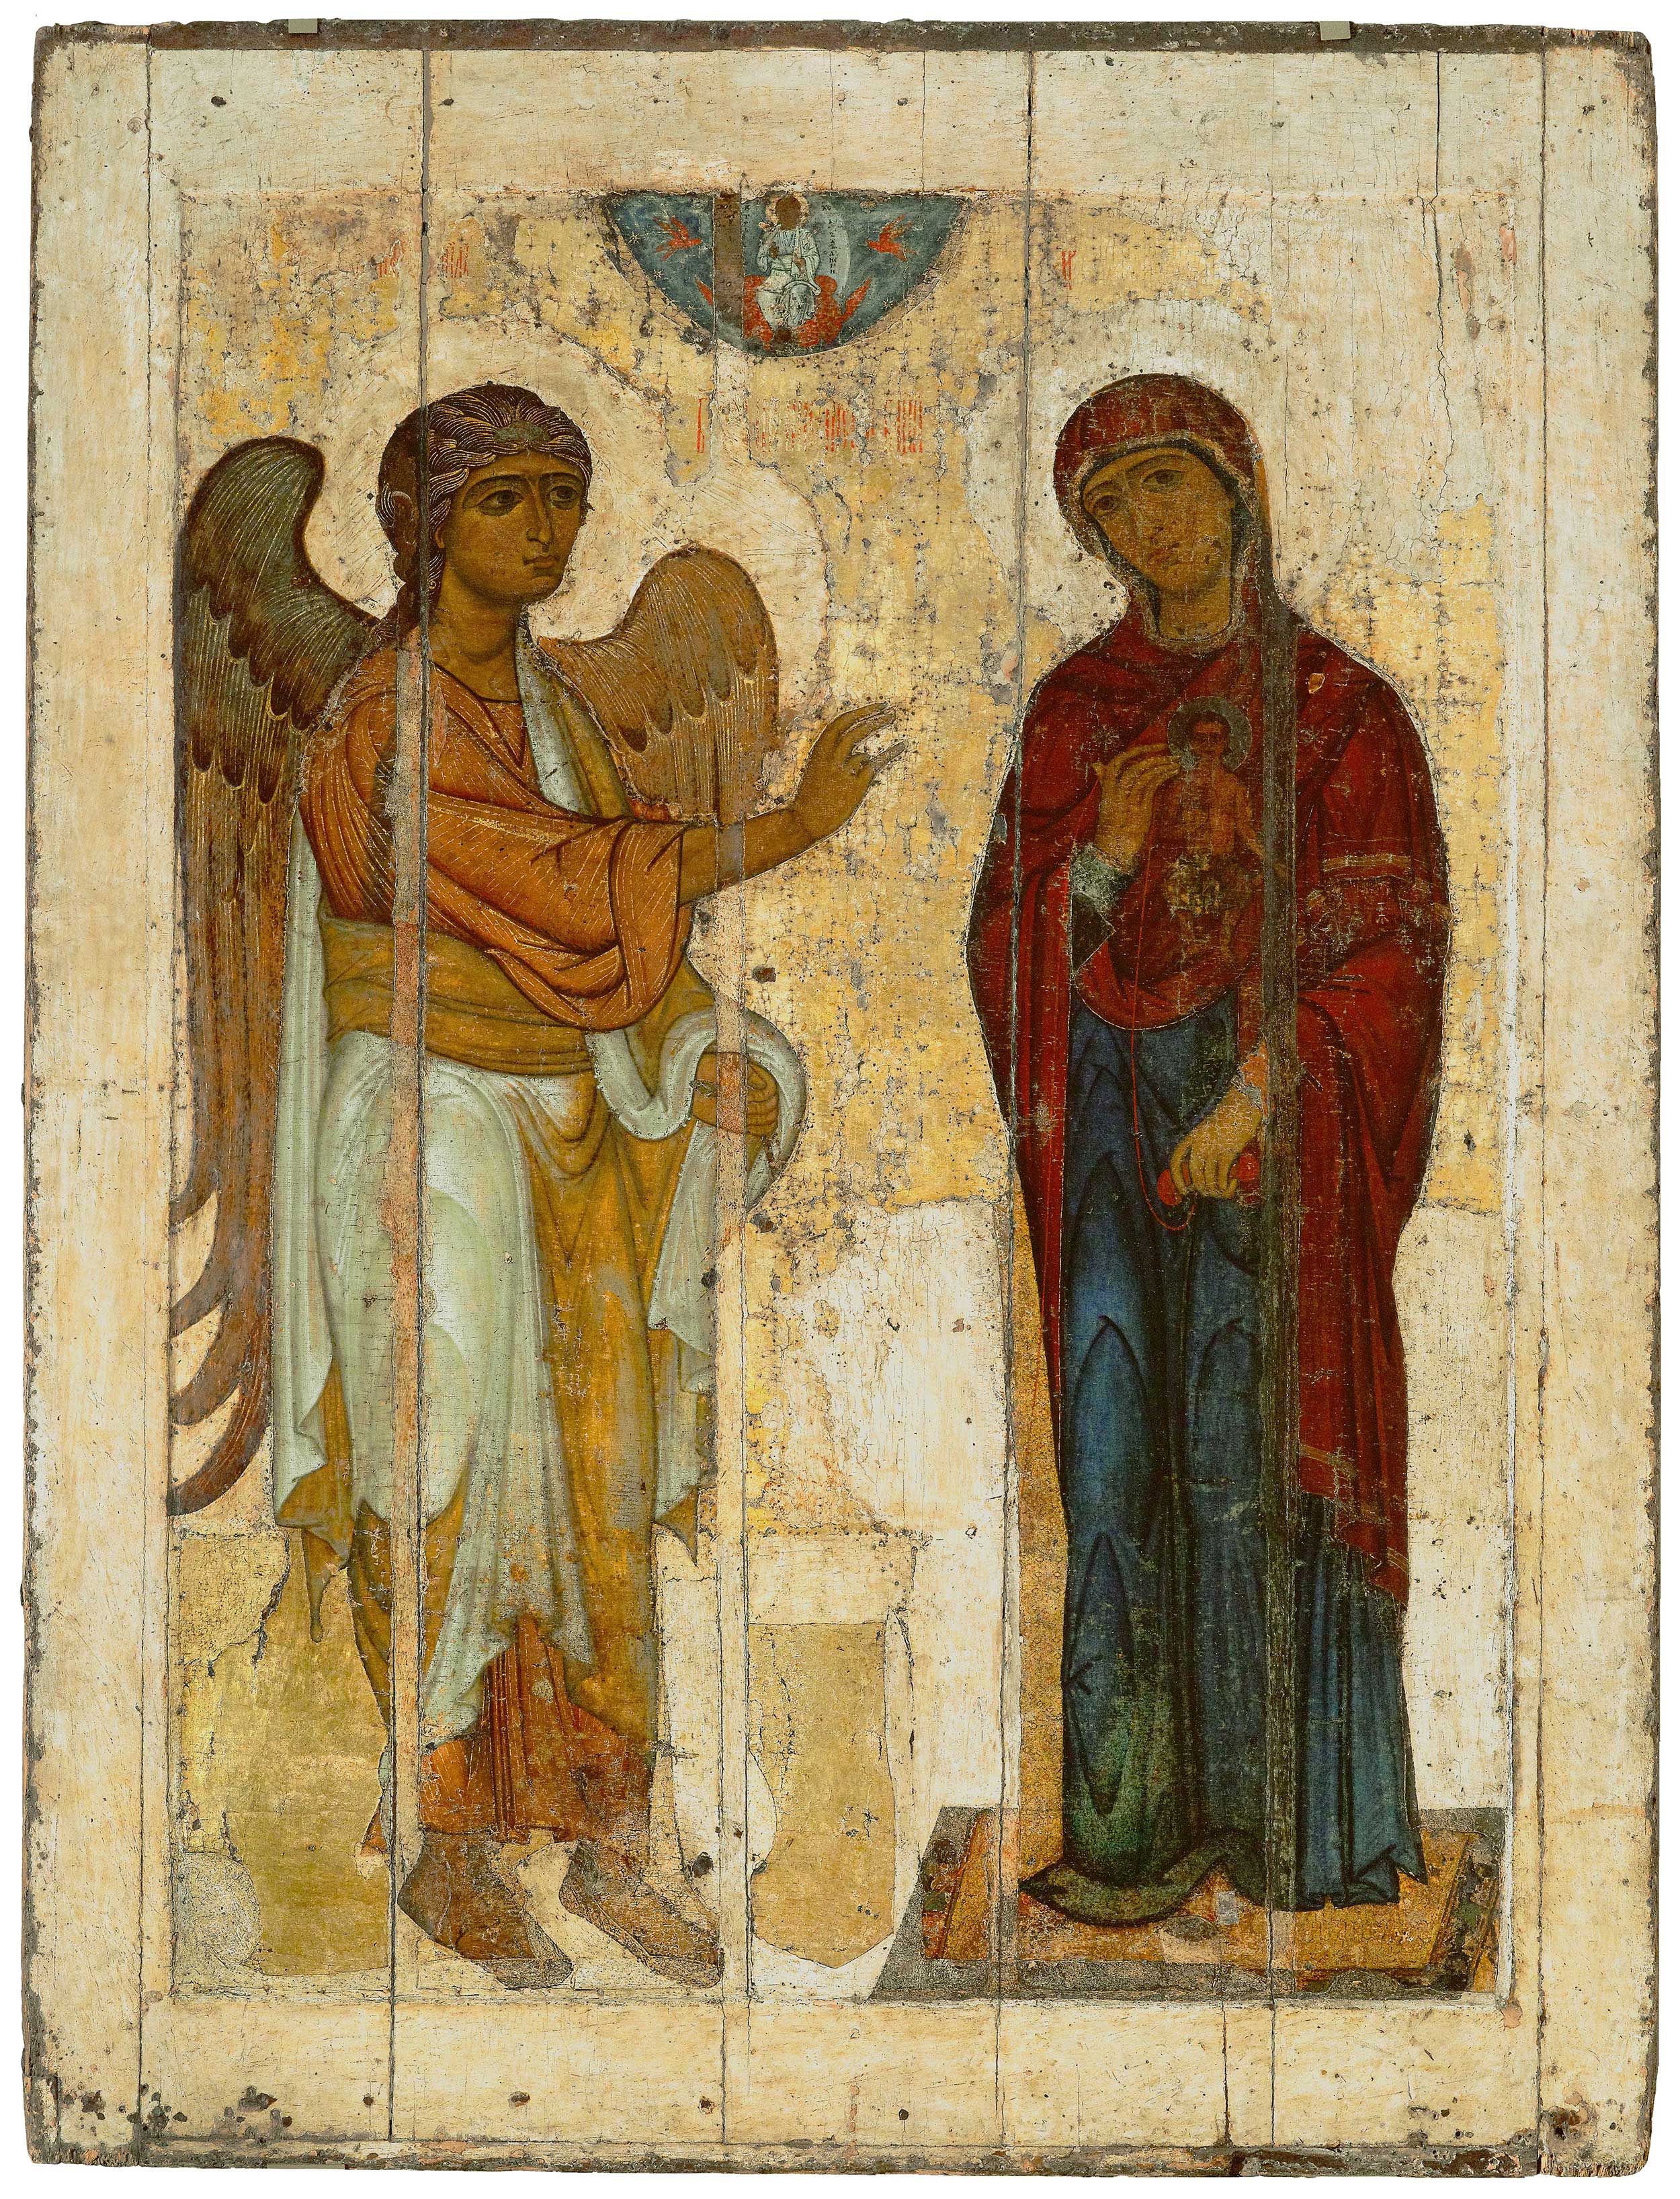 Annunciation of the Death of the Virgin (y1994-12)